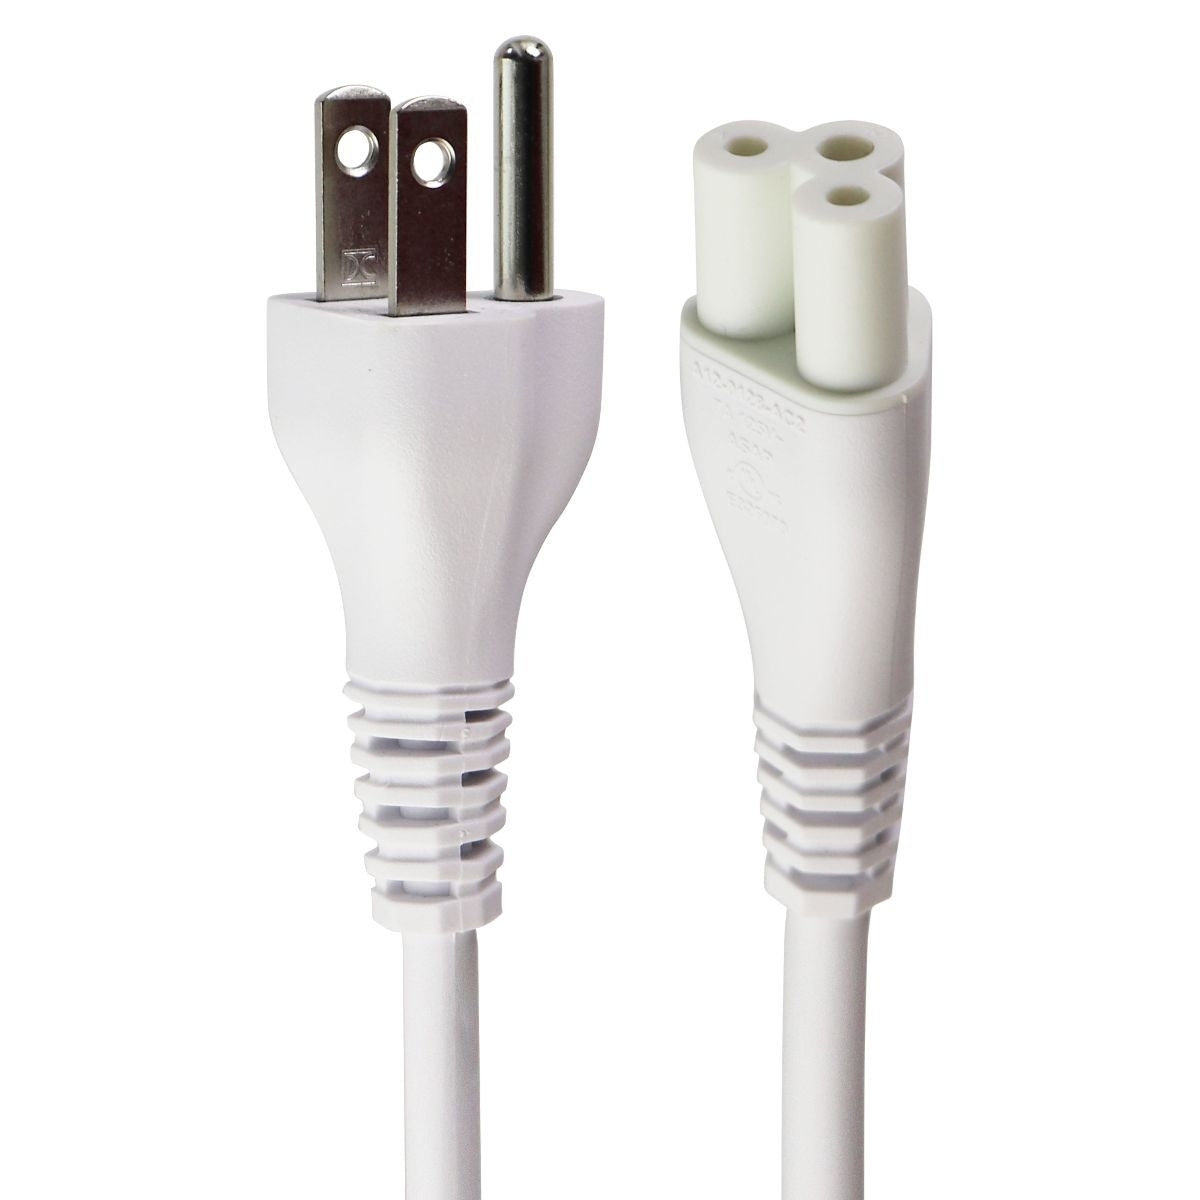 ASAP (7A / 125V) 3-Prong Power Supply Cable - White (A12-0128-AC2 / E326979) Multipurpose Batteries & Power - Multipurpose AC to DC Adapters ASAP    - Simple Cell Bulk Wholesale Pricing - USA Seller